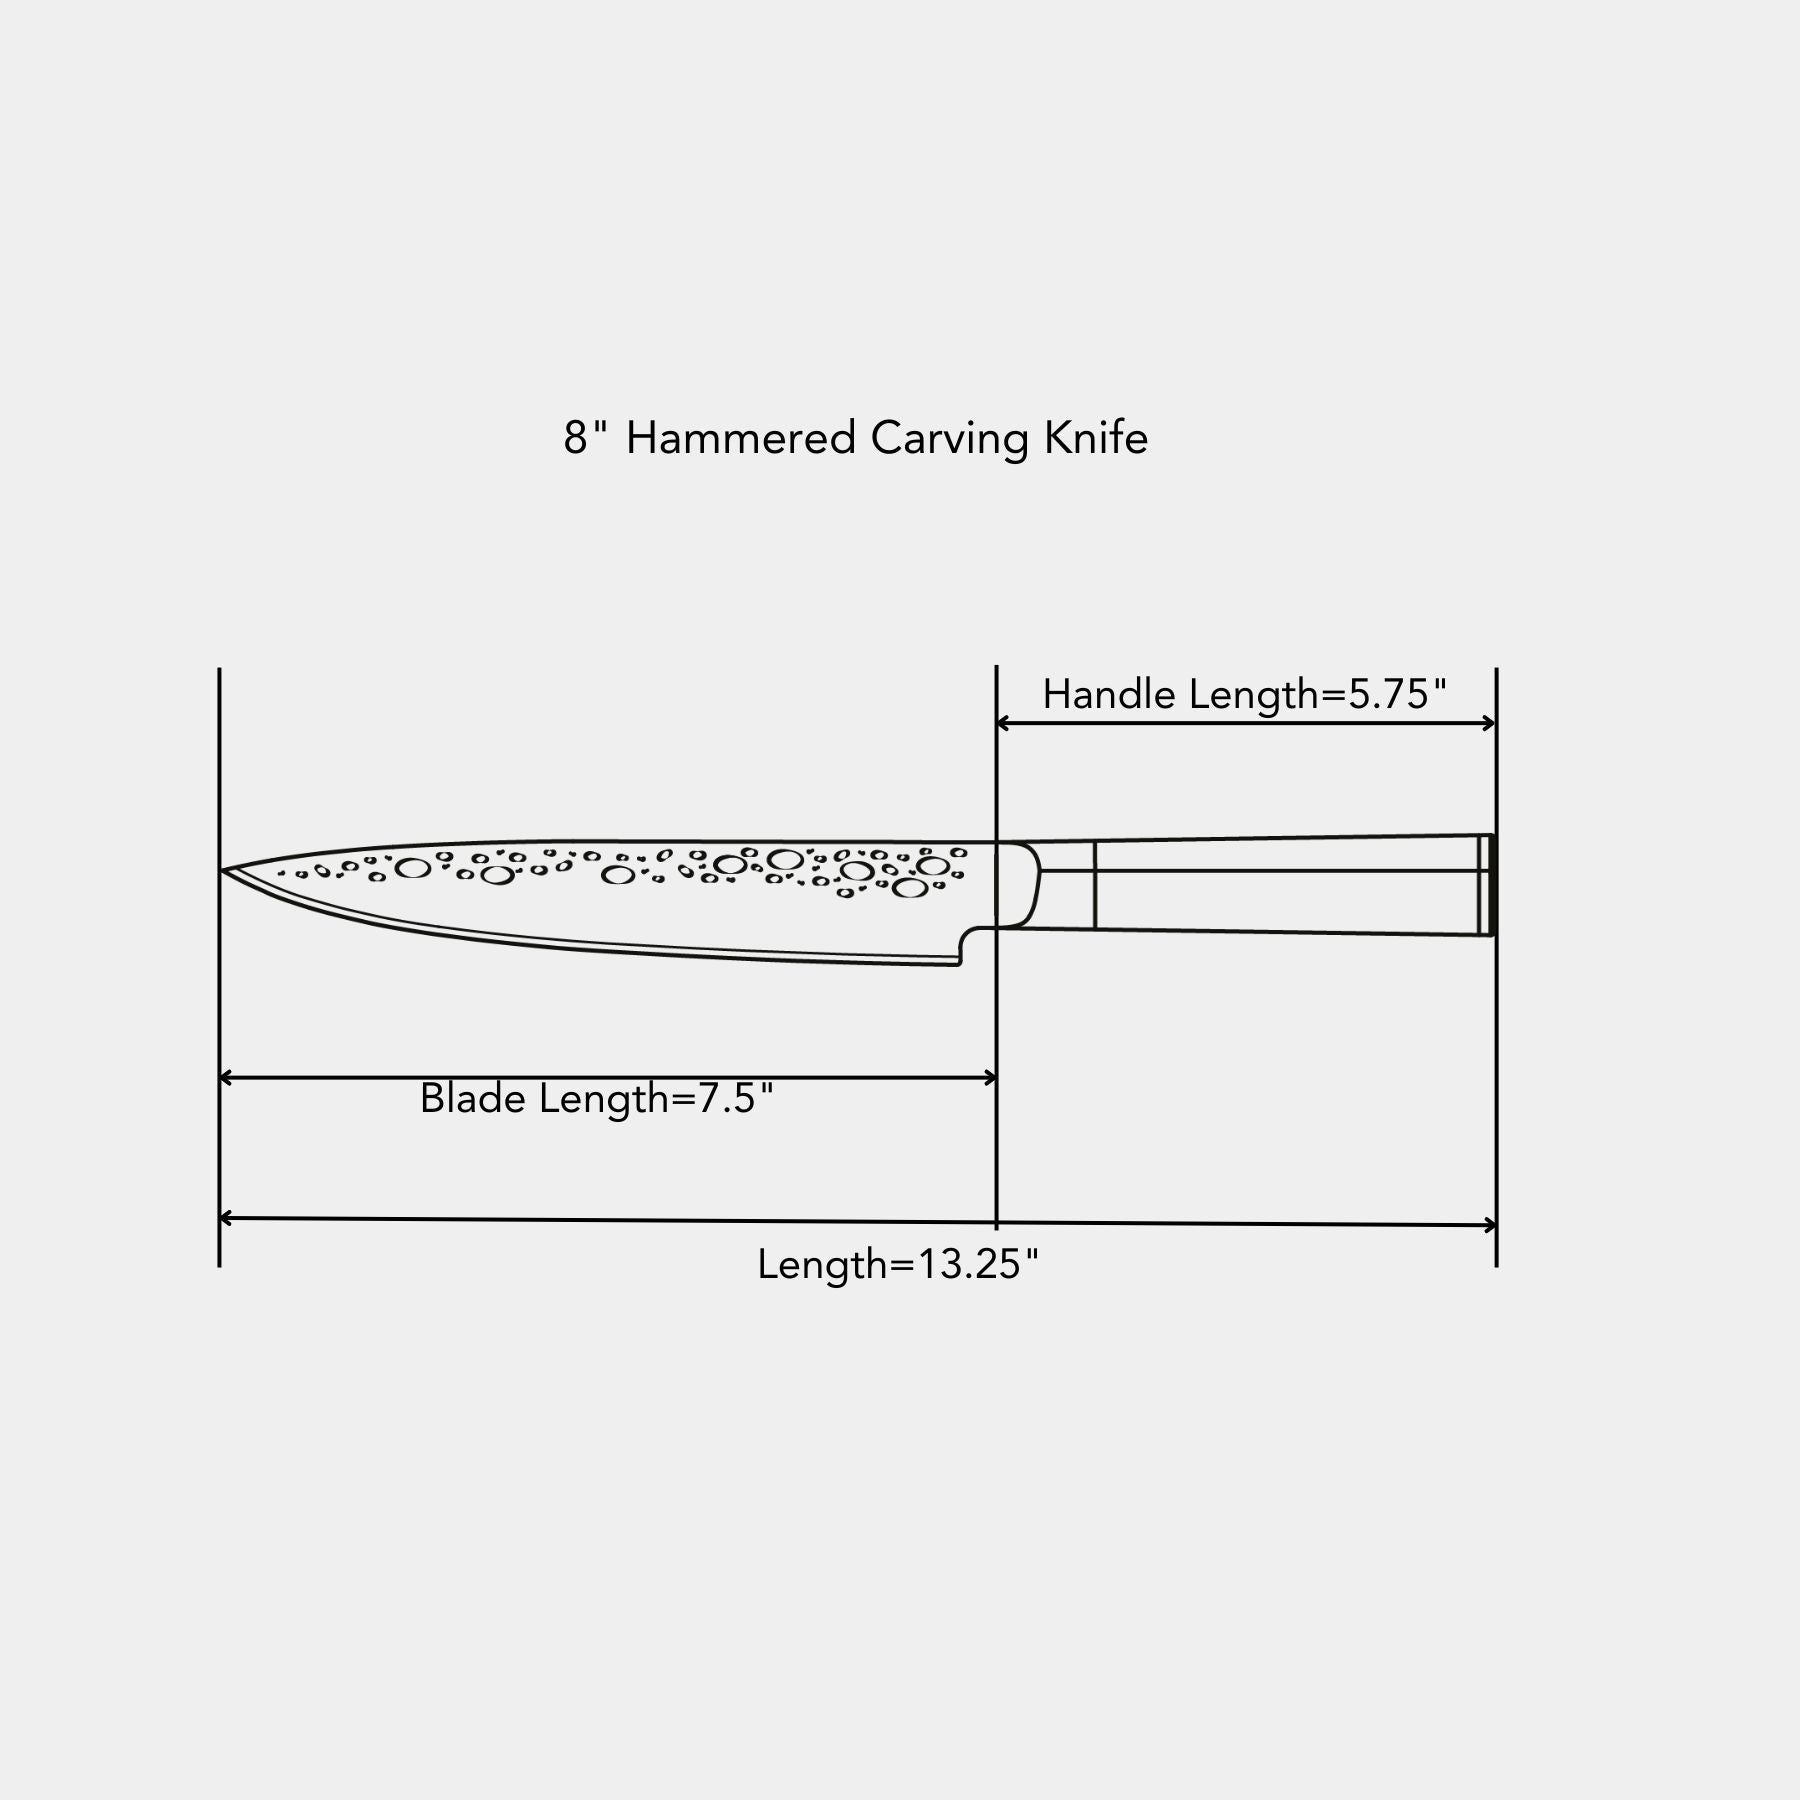 8" Hammered Carving Knife dimensions of blade and handle length